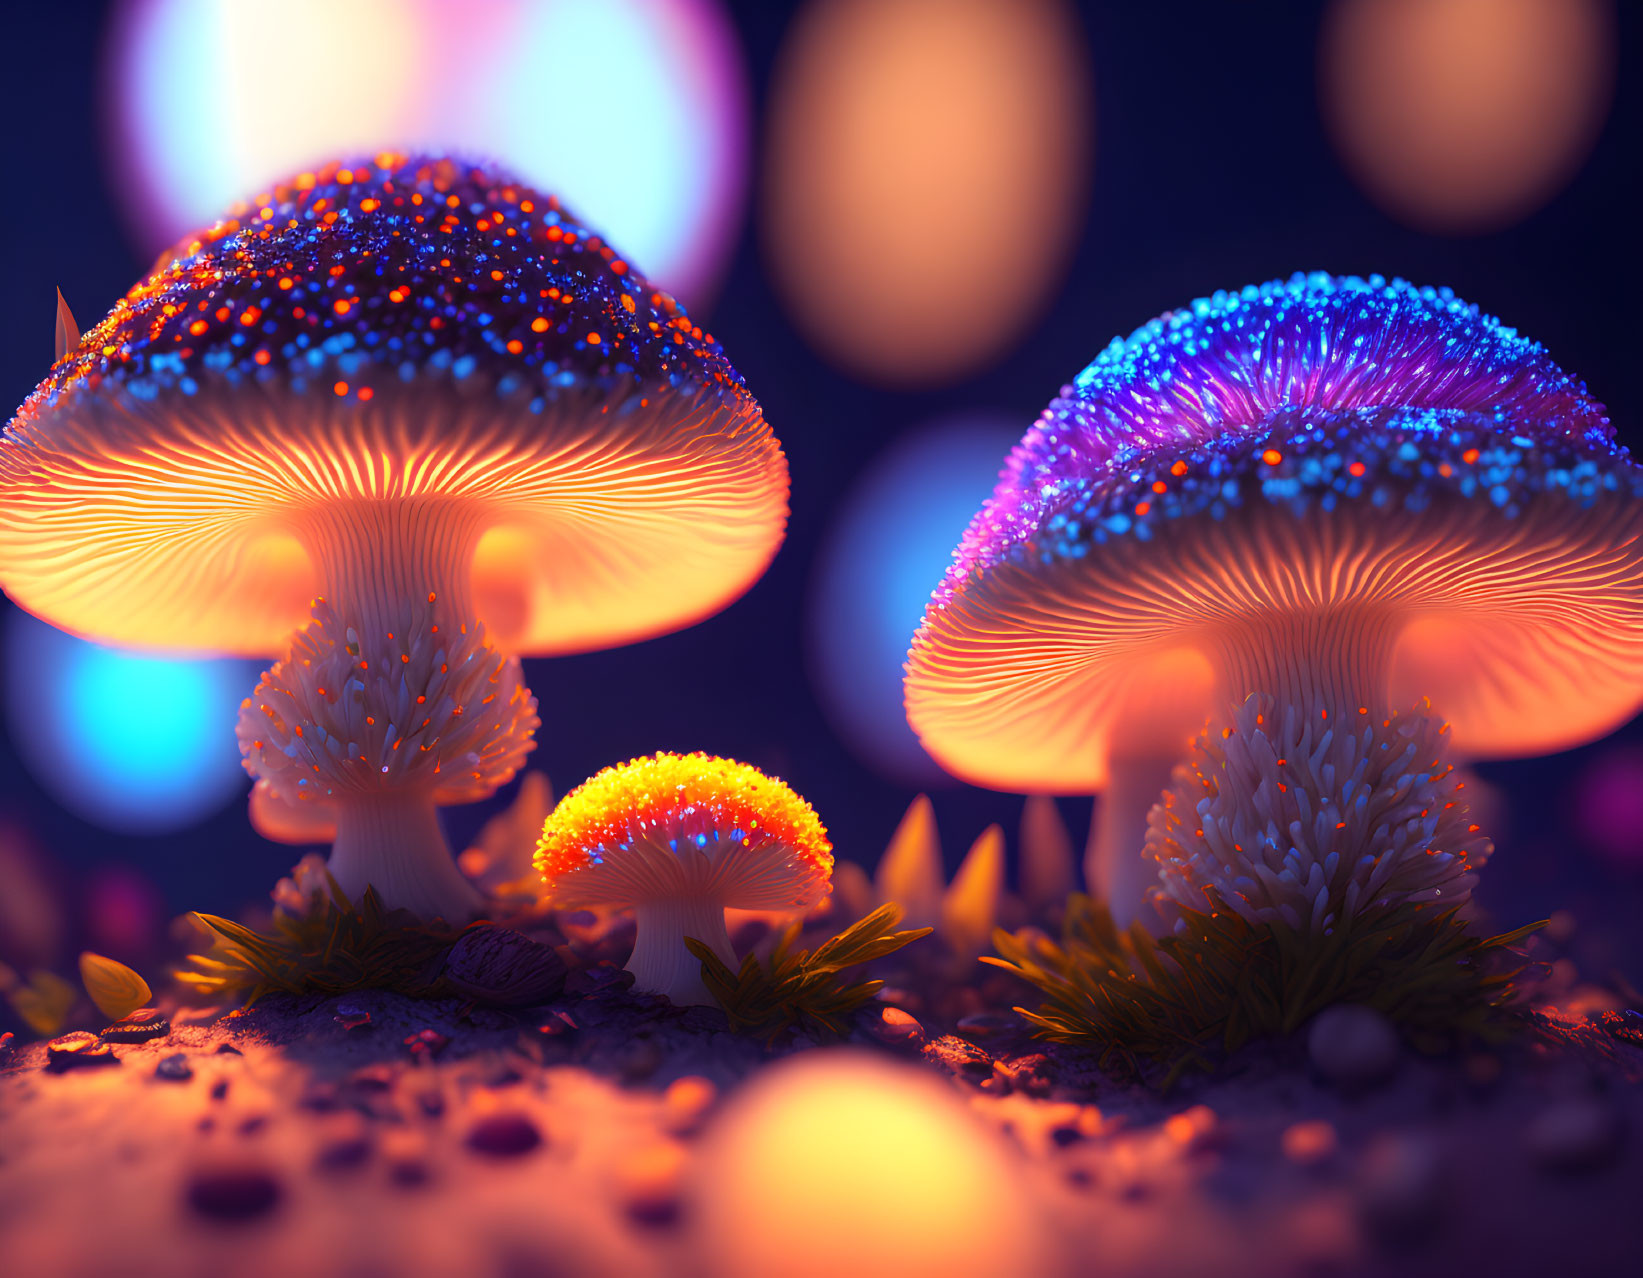 magic mushrooms with many modifiers & effects etc.